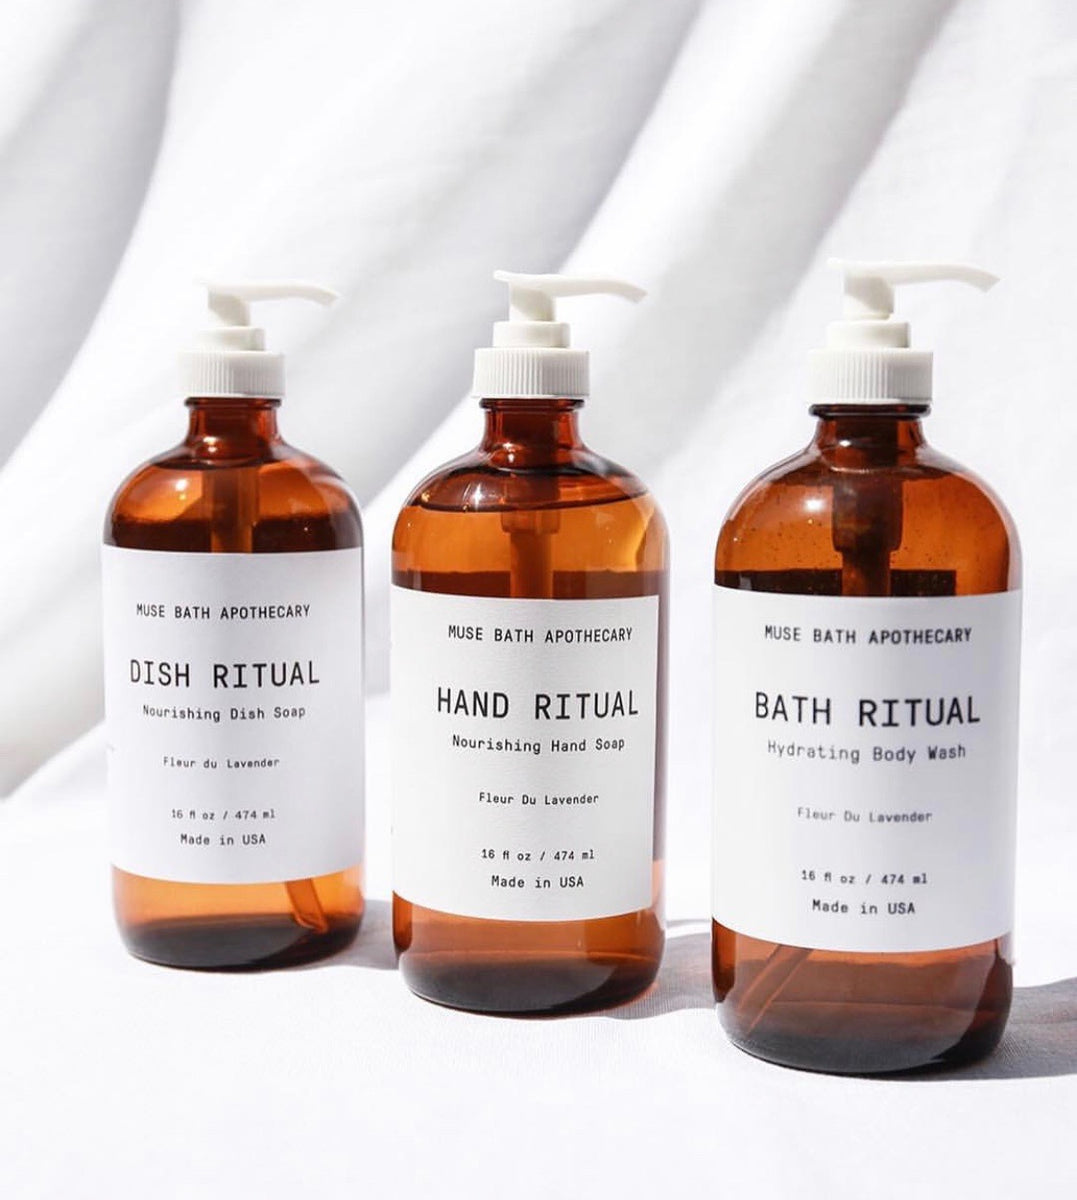 Muse Hand Ritual Botanical Hand Soap — Muse Apothecary